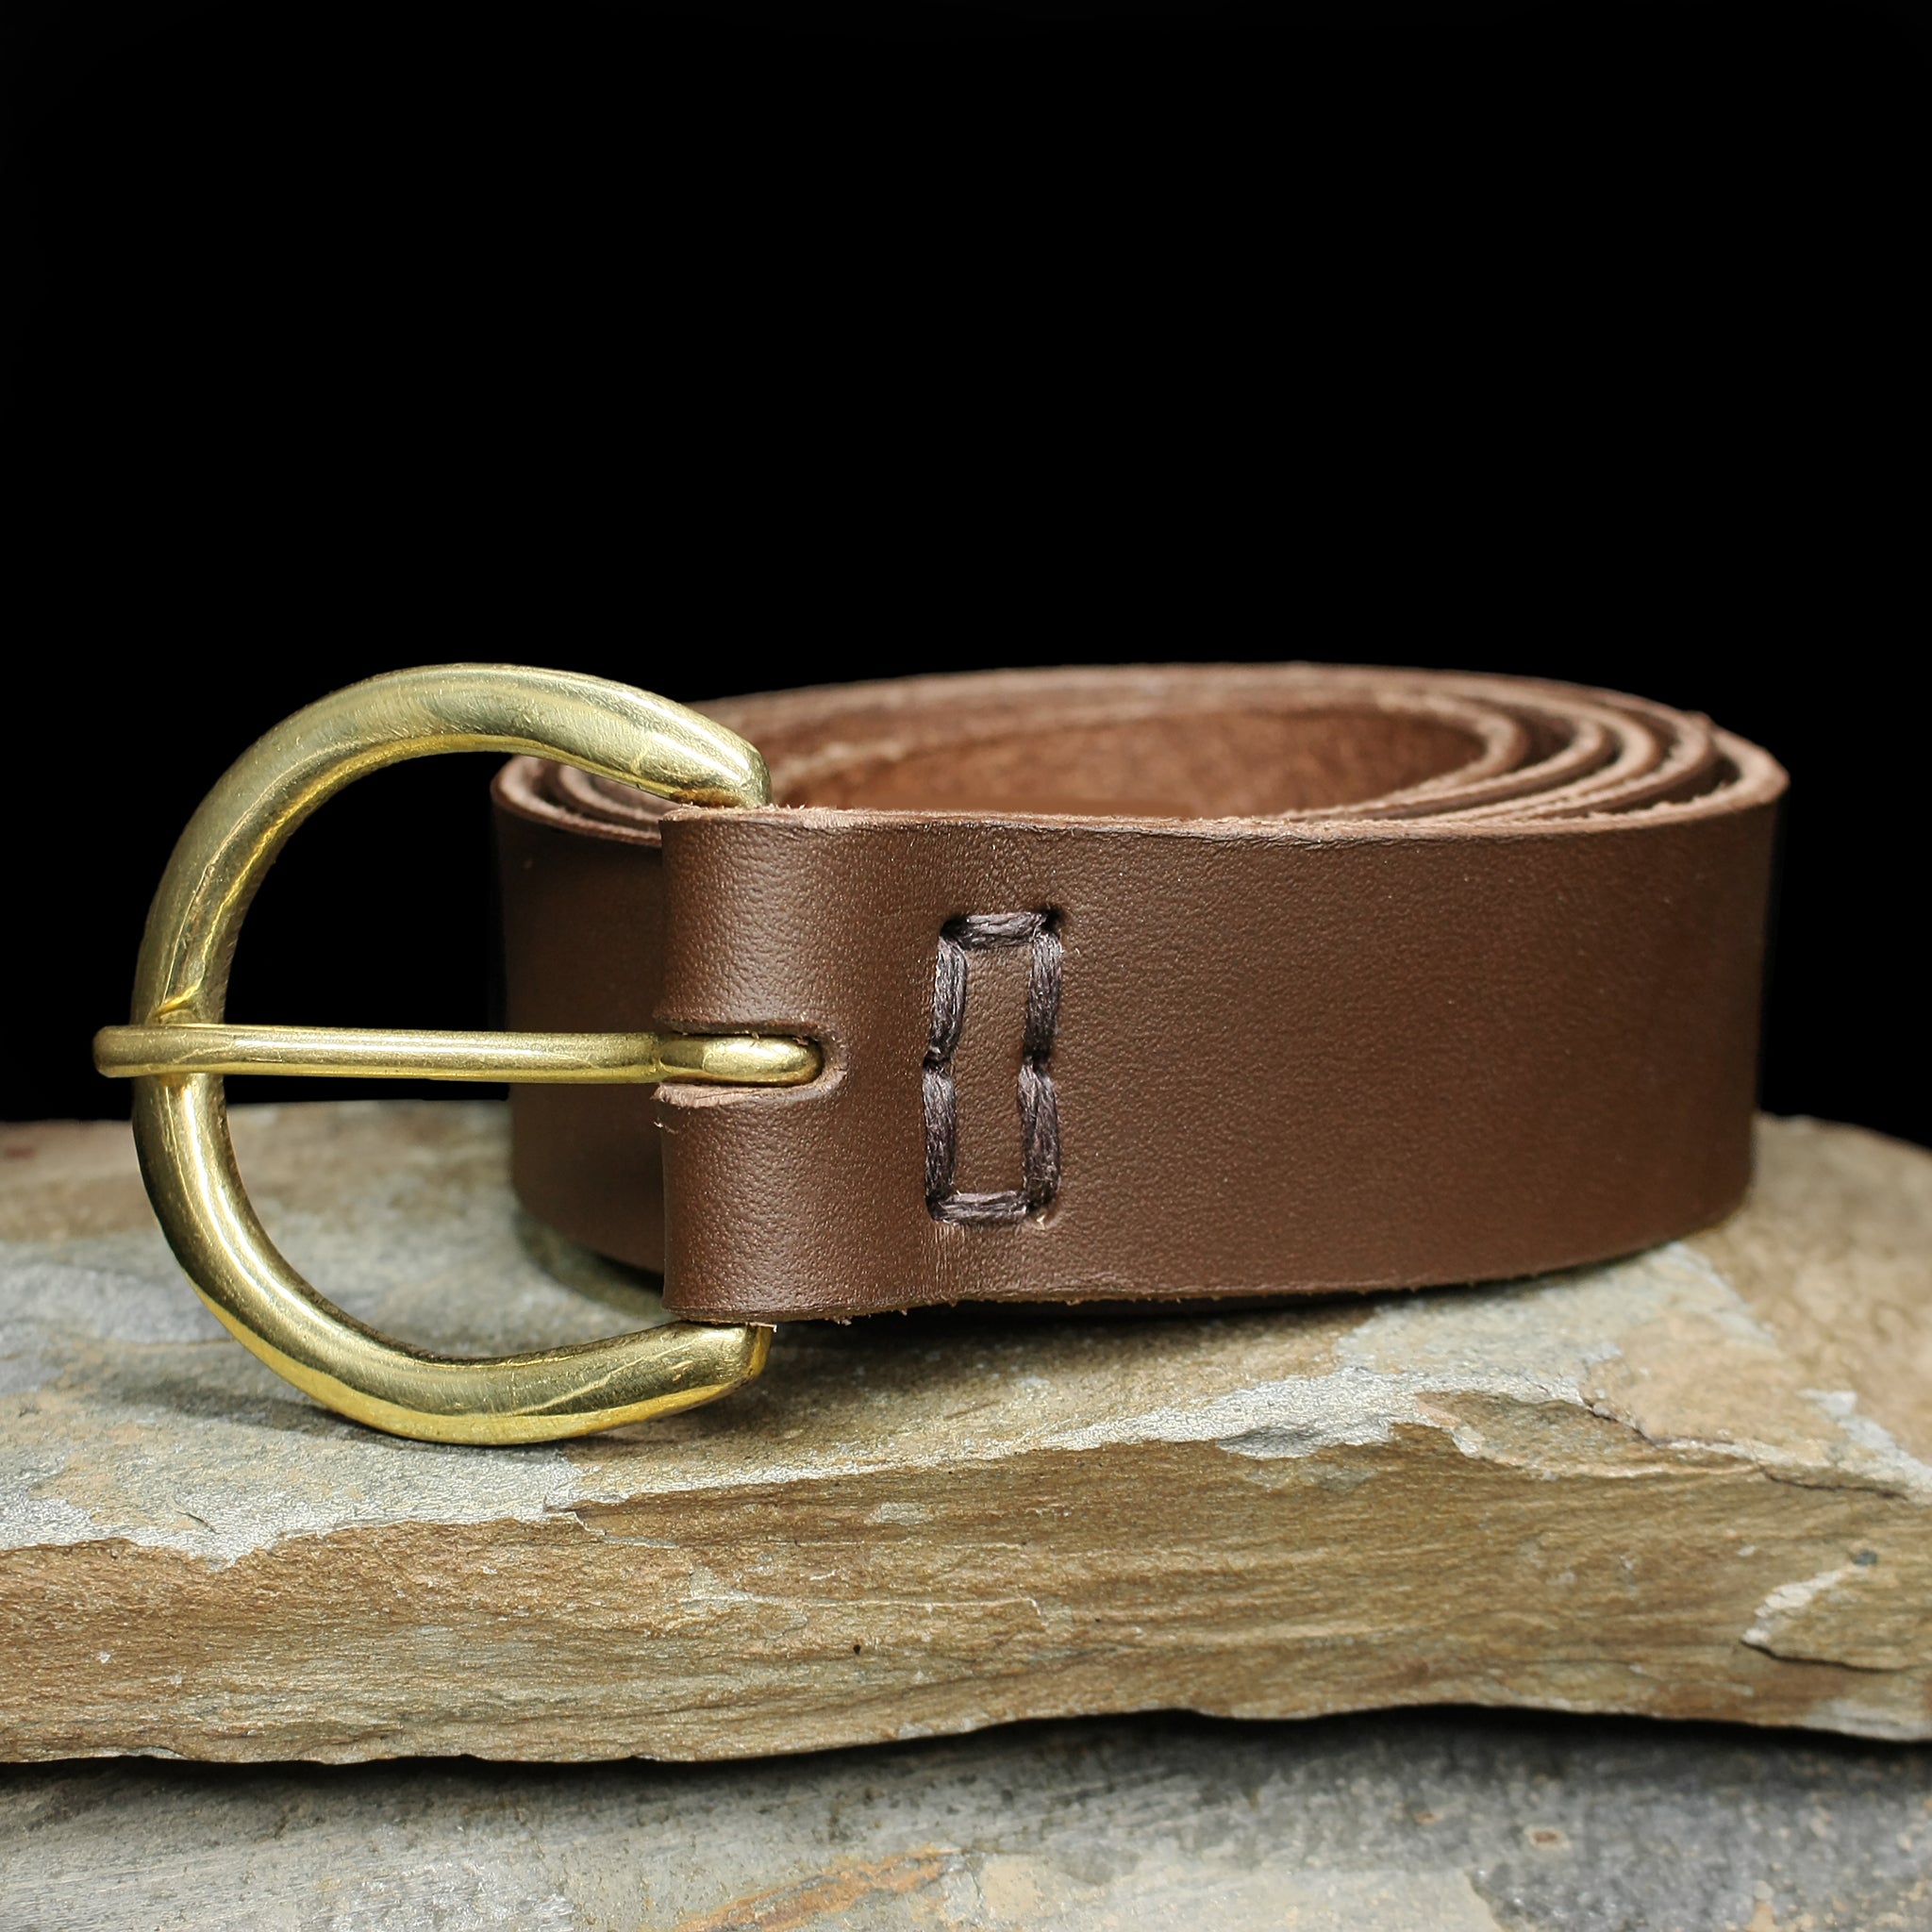 38mm Wide Leather Viking Belt with Brass Buckle - Brown